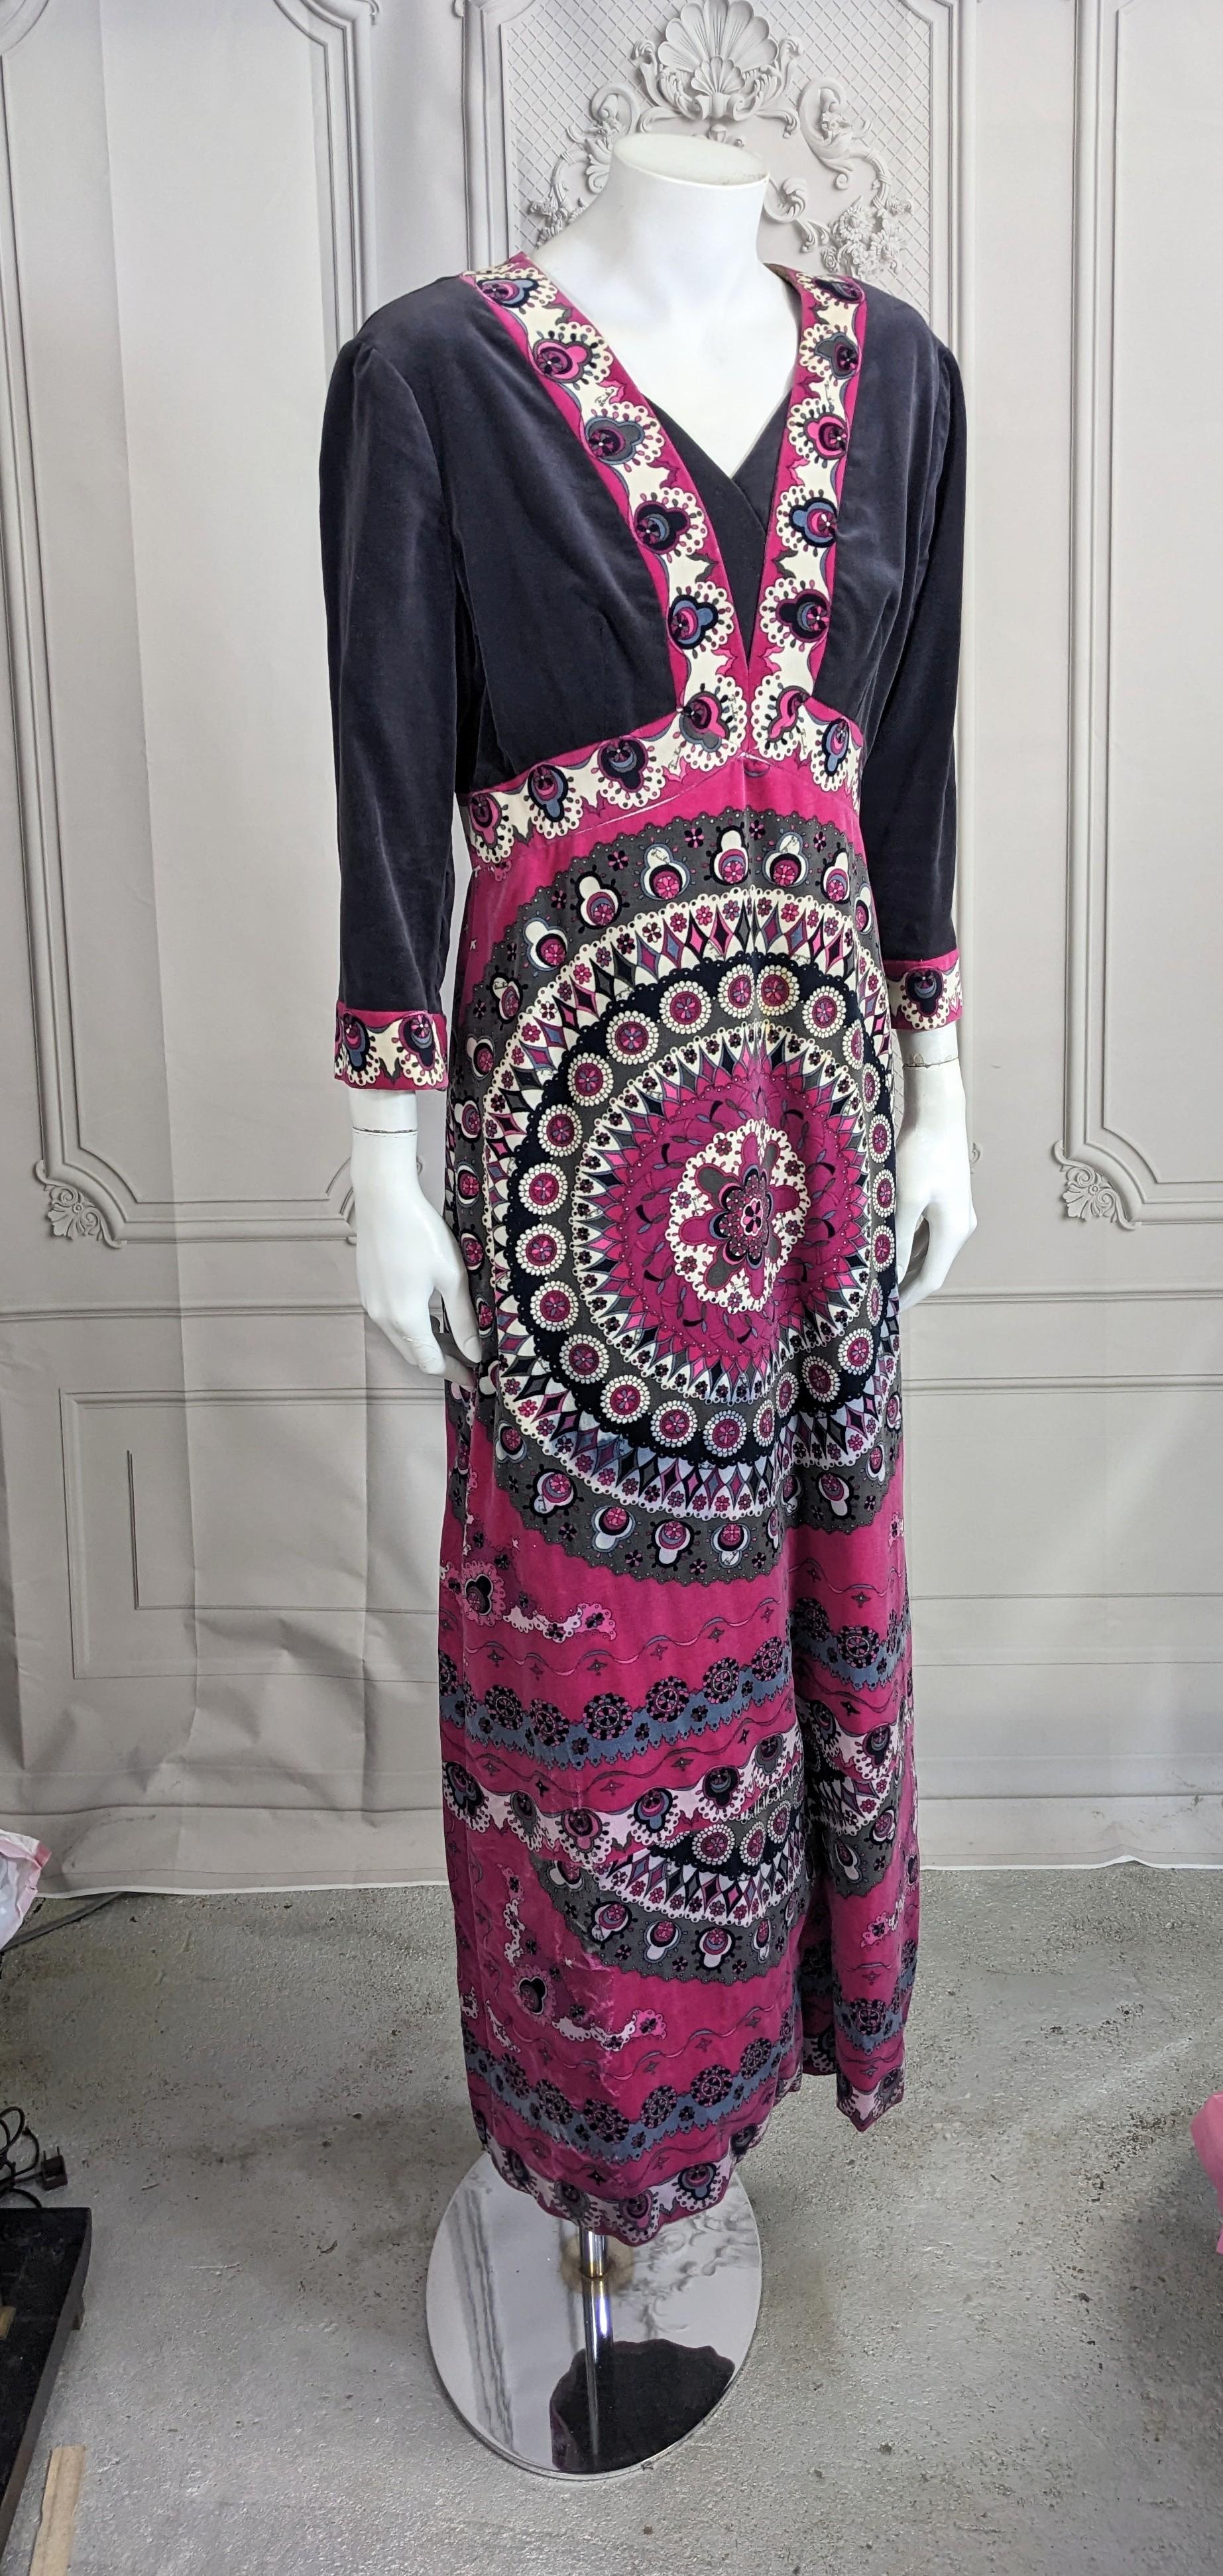 Emilio Pucci Graphic Velvet Gown with Choker In Good Condition For Sale In New York, NY